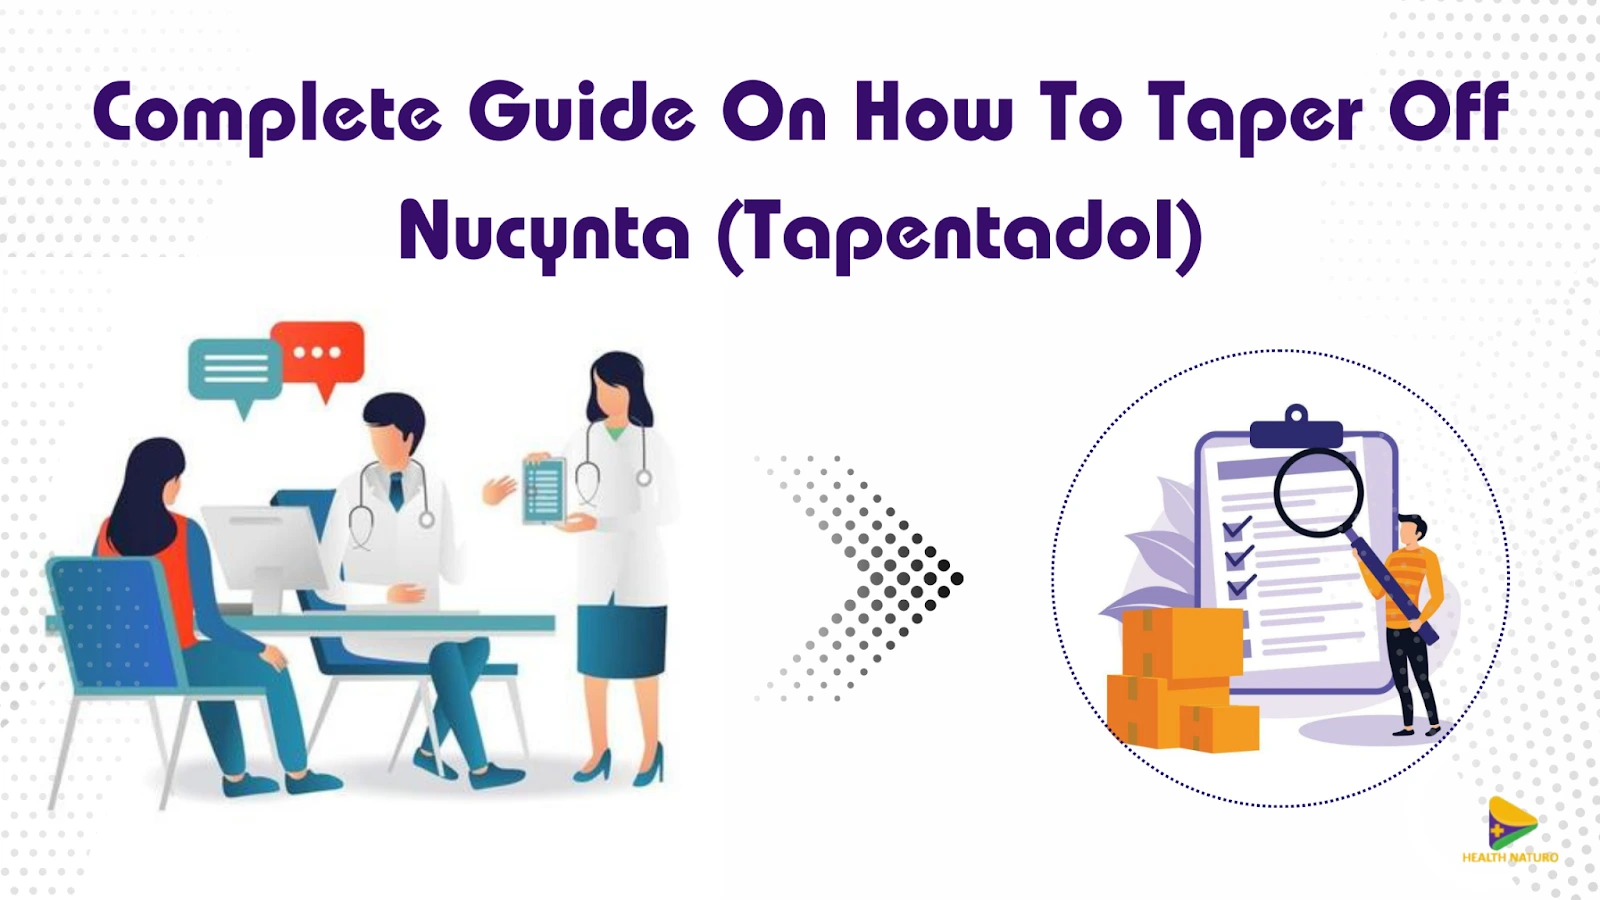 Complete Guide On How To Taper Off Nucynta (Tapentadol)